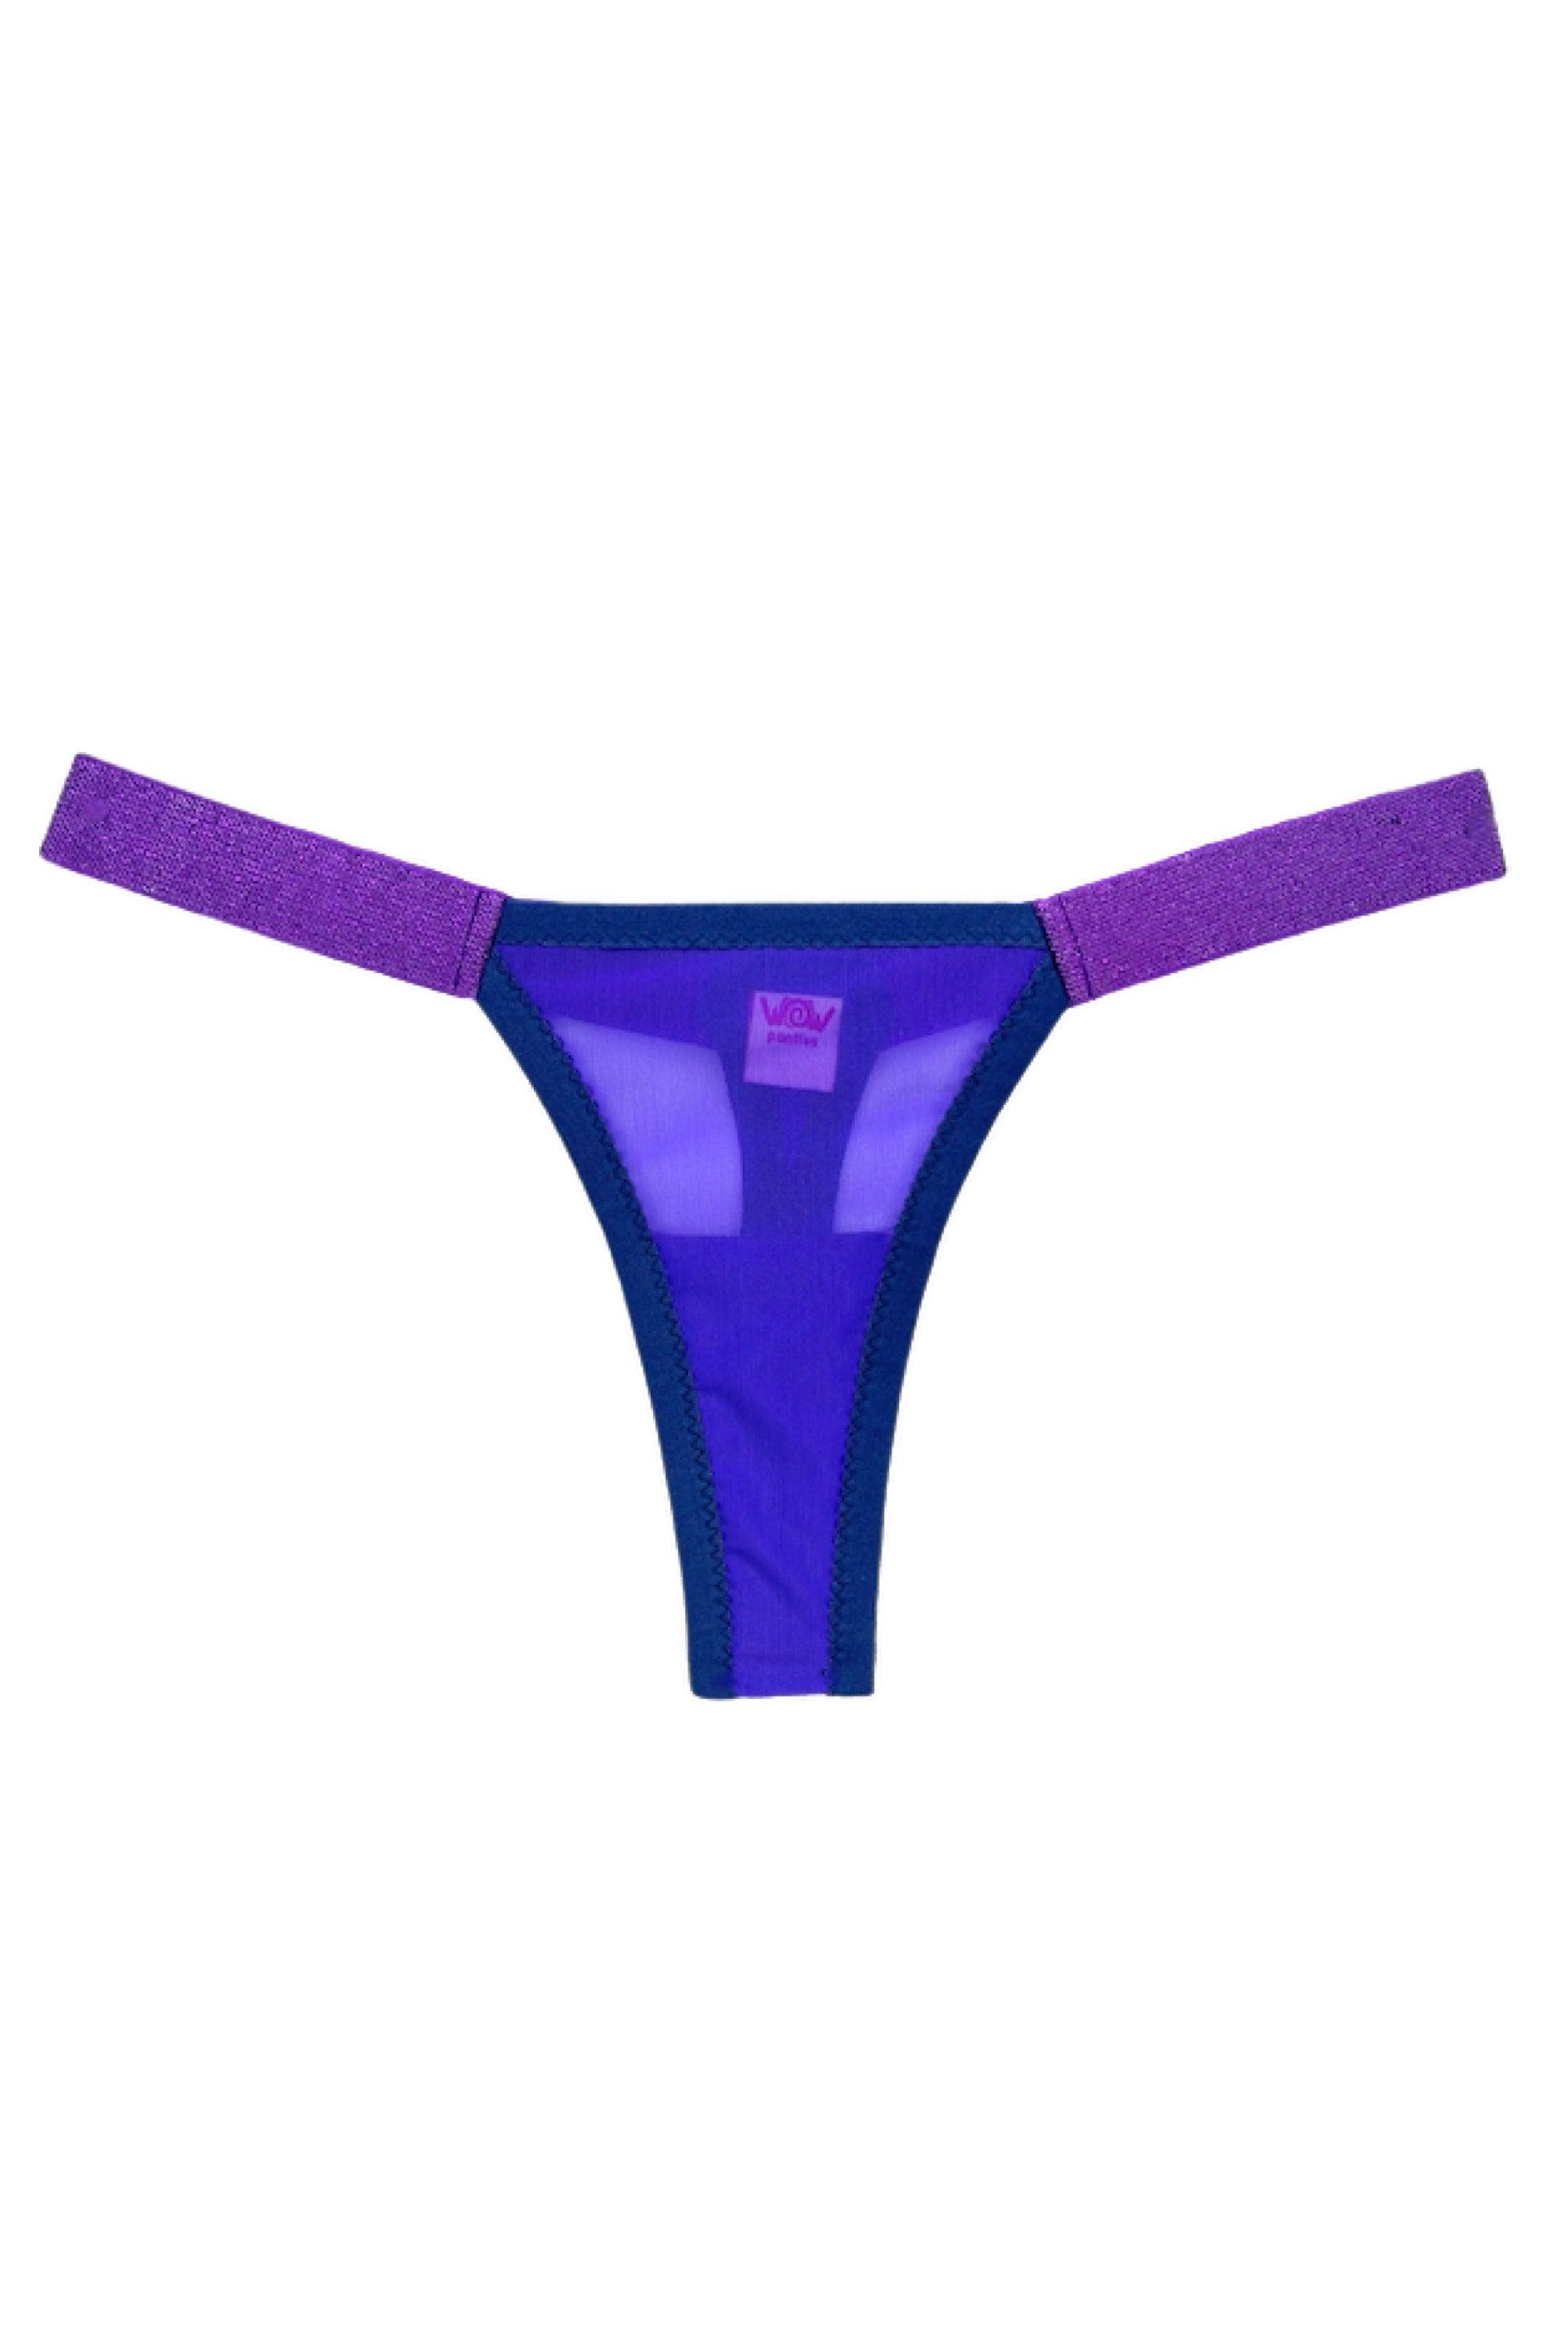 Sparky Violet thongs - yesUndress